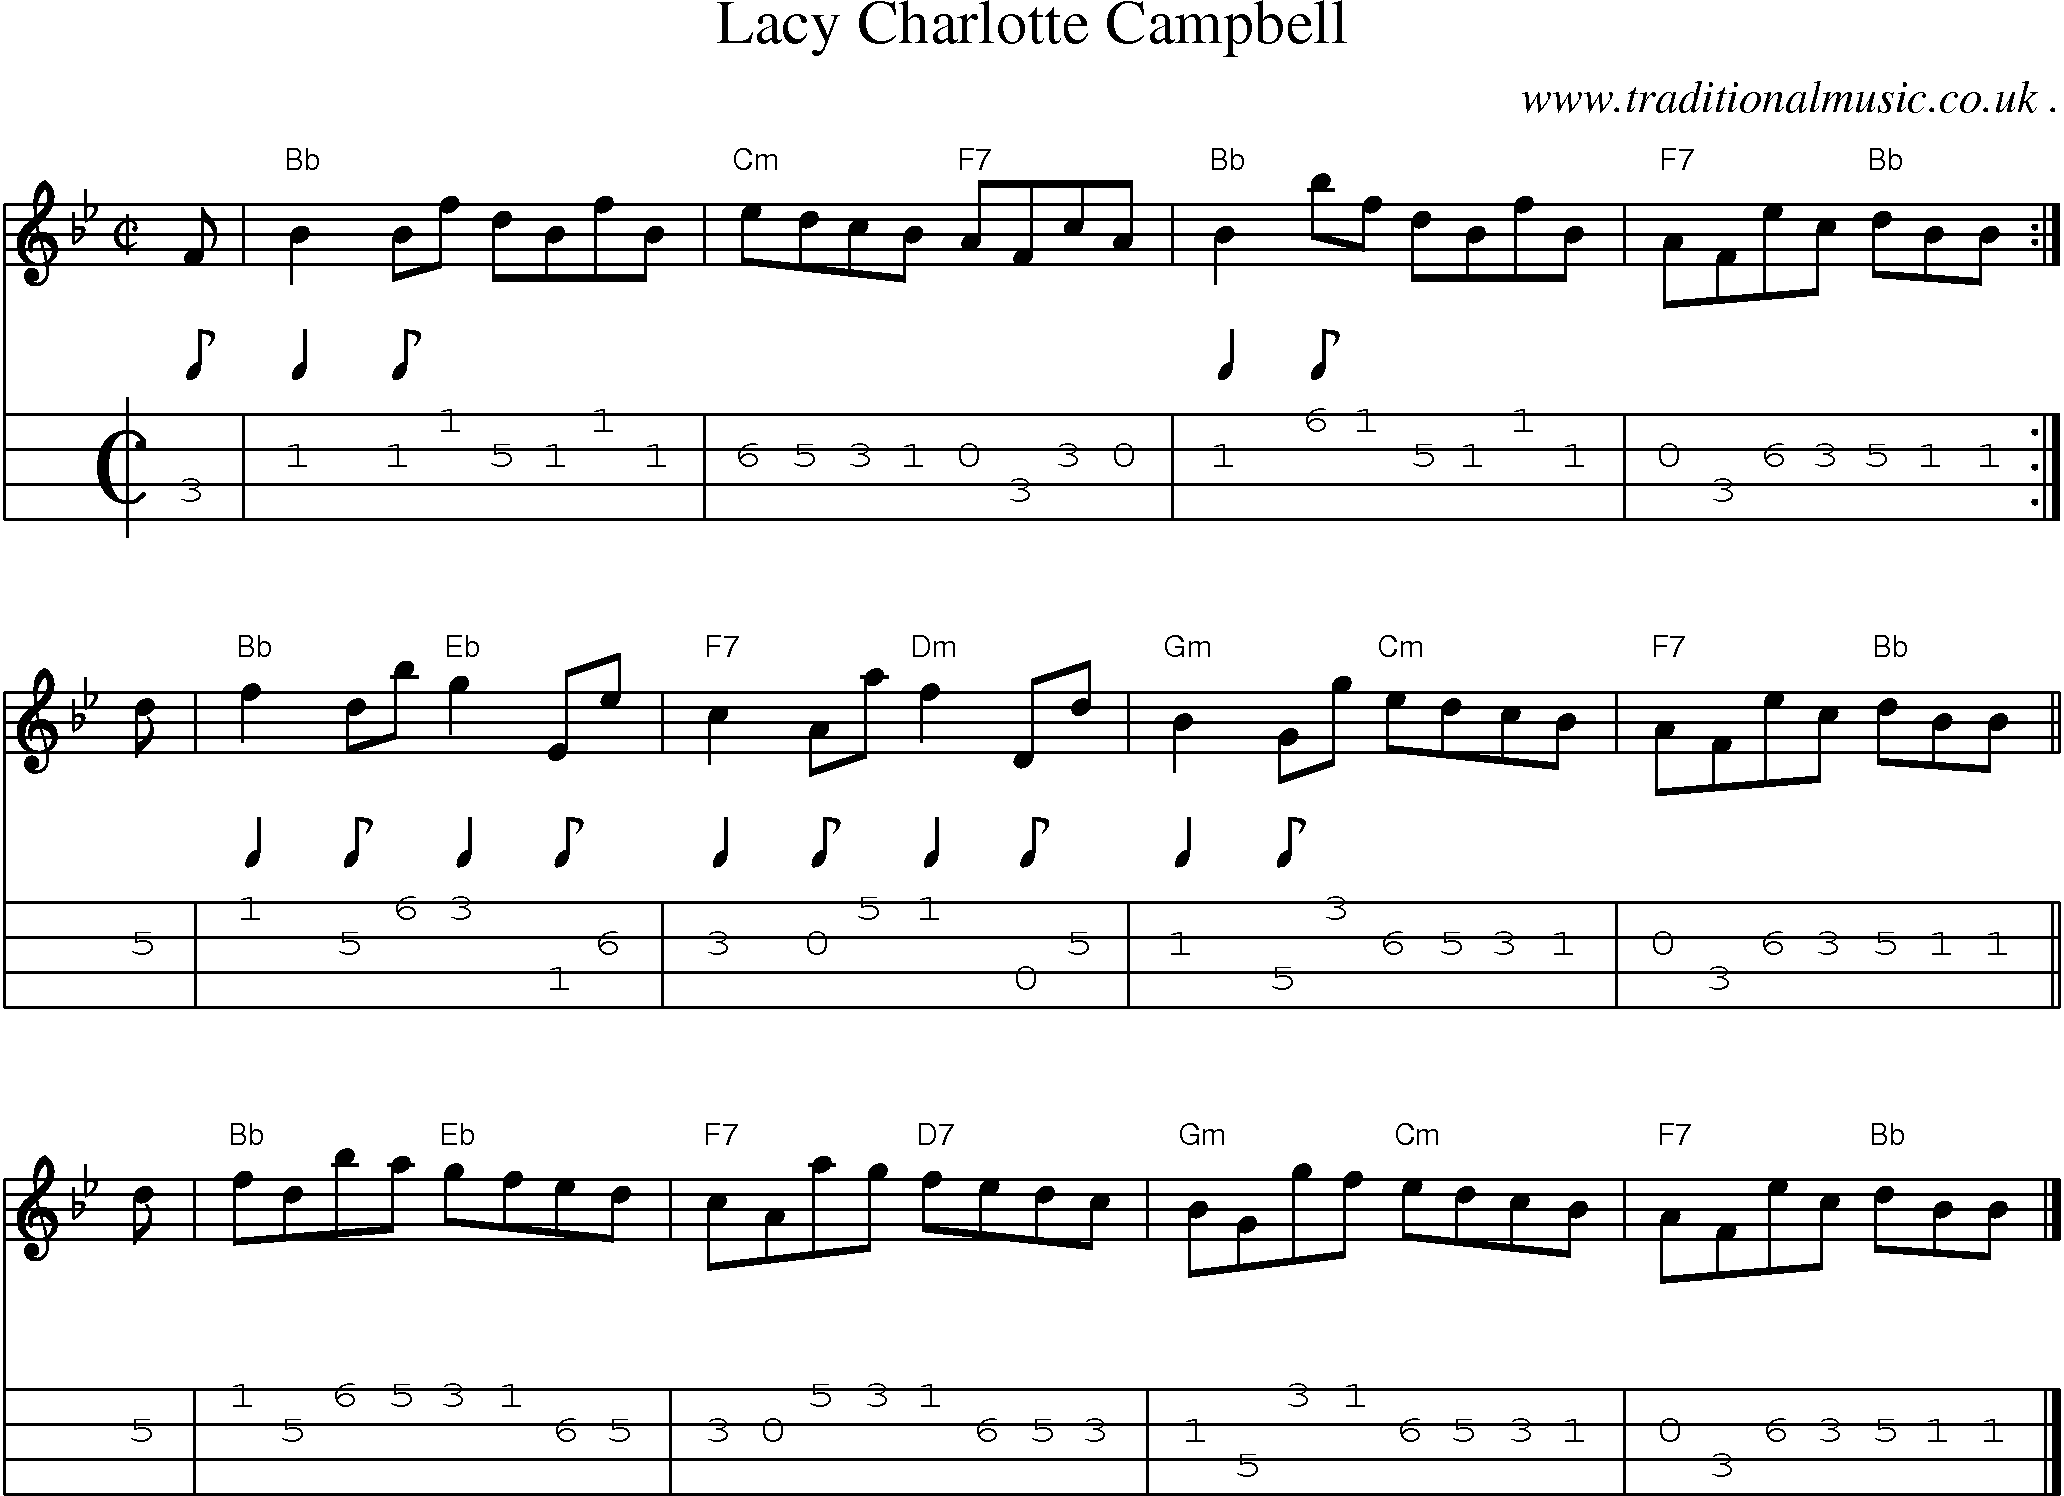 Sheet-music  score, Chords and Mandolin Tabs for Lacy Charlotte Campbell